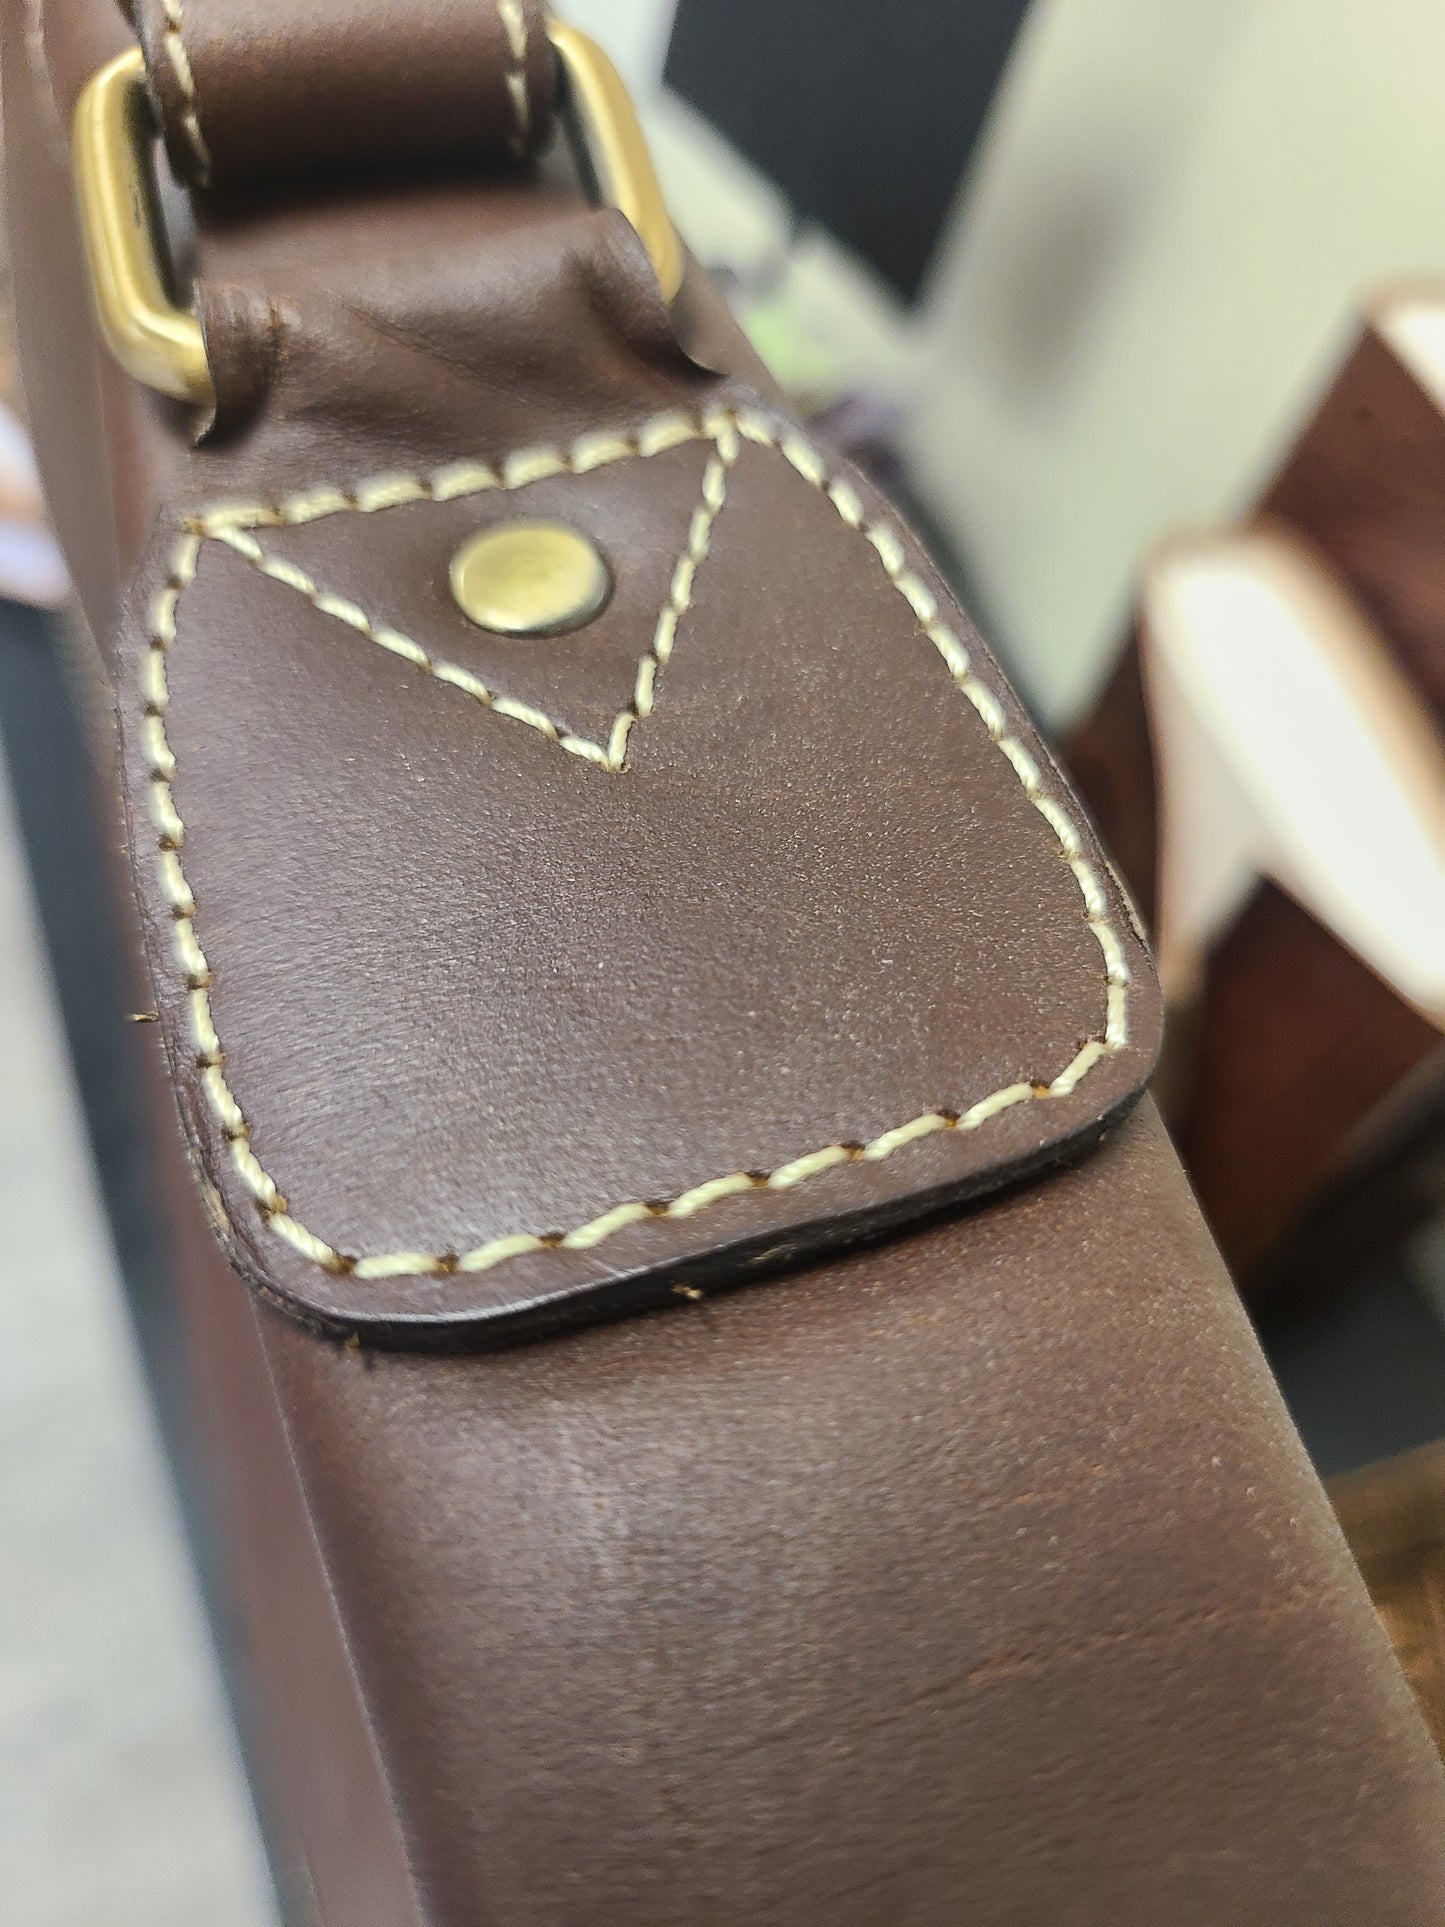 Leather Stitched Messenger Bag - Chocolate-Status Co. Leather Studio